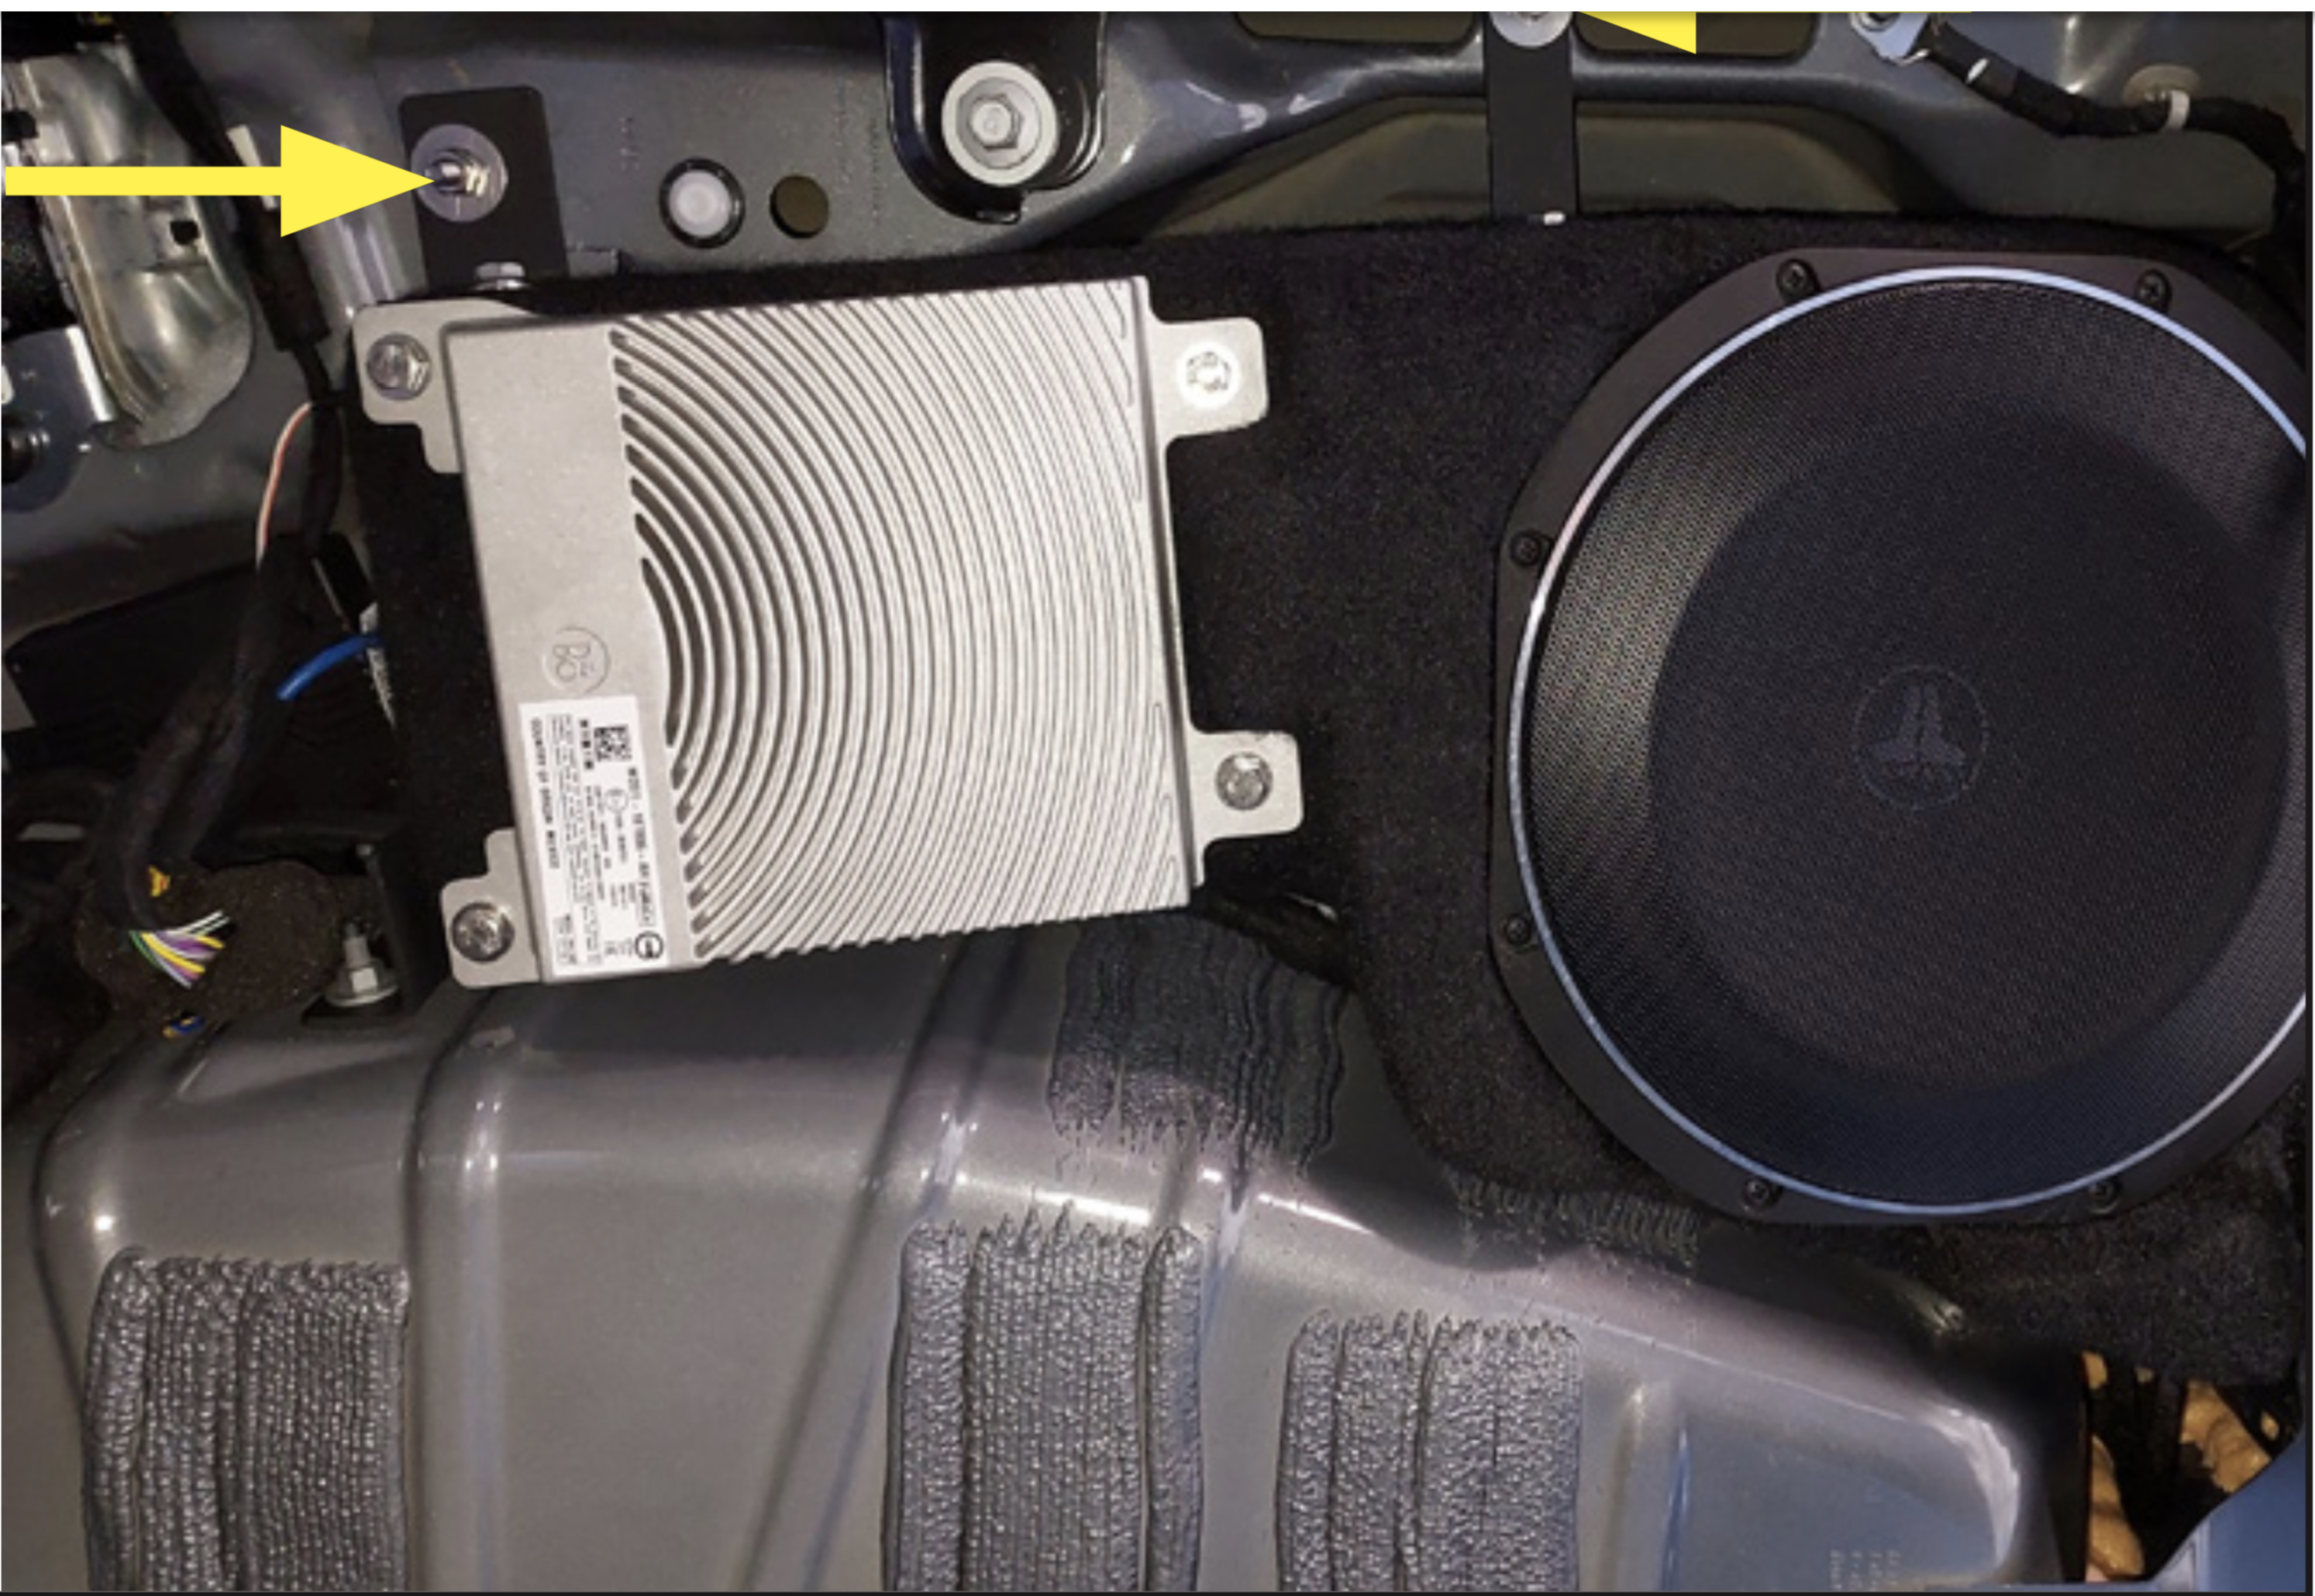 Ford Bronco JL Audio Stealthbox subwoofer enclosure for Bronco now available IMG_0271